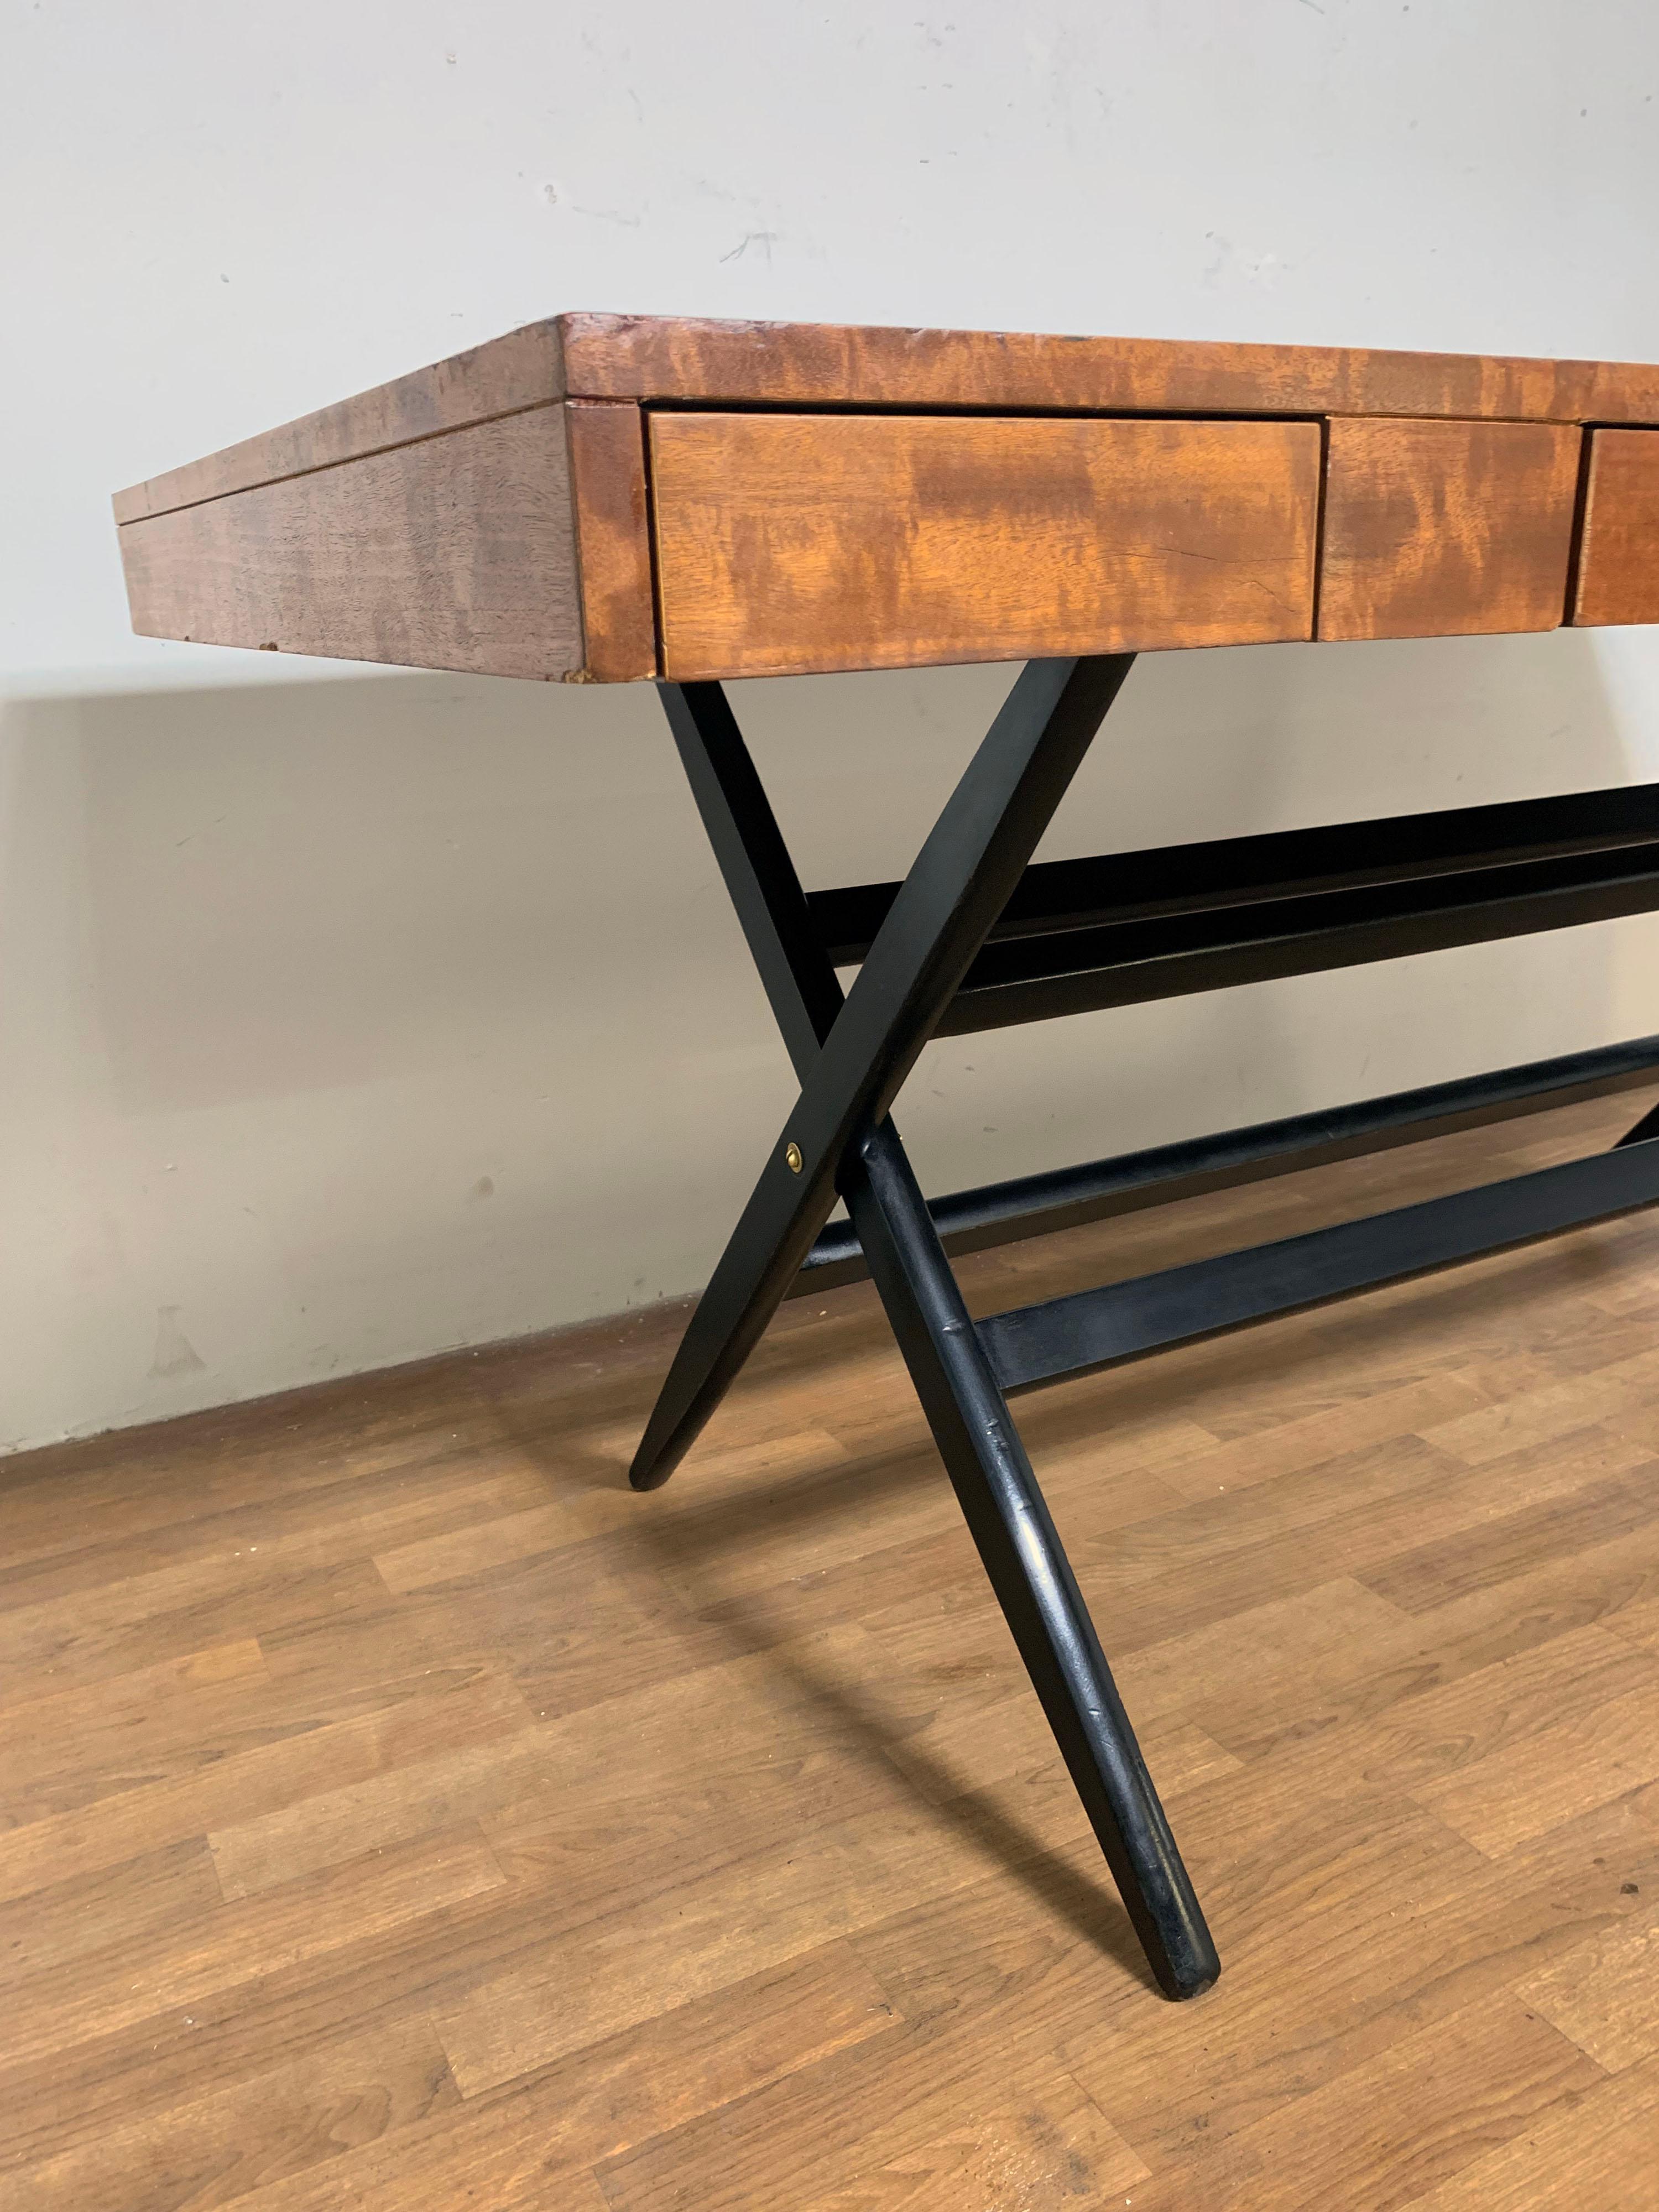 Wood Post Modern Custom Made Campaign Style Partners Desk with X Form Legs